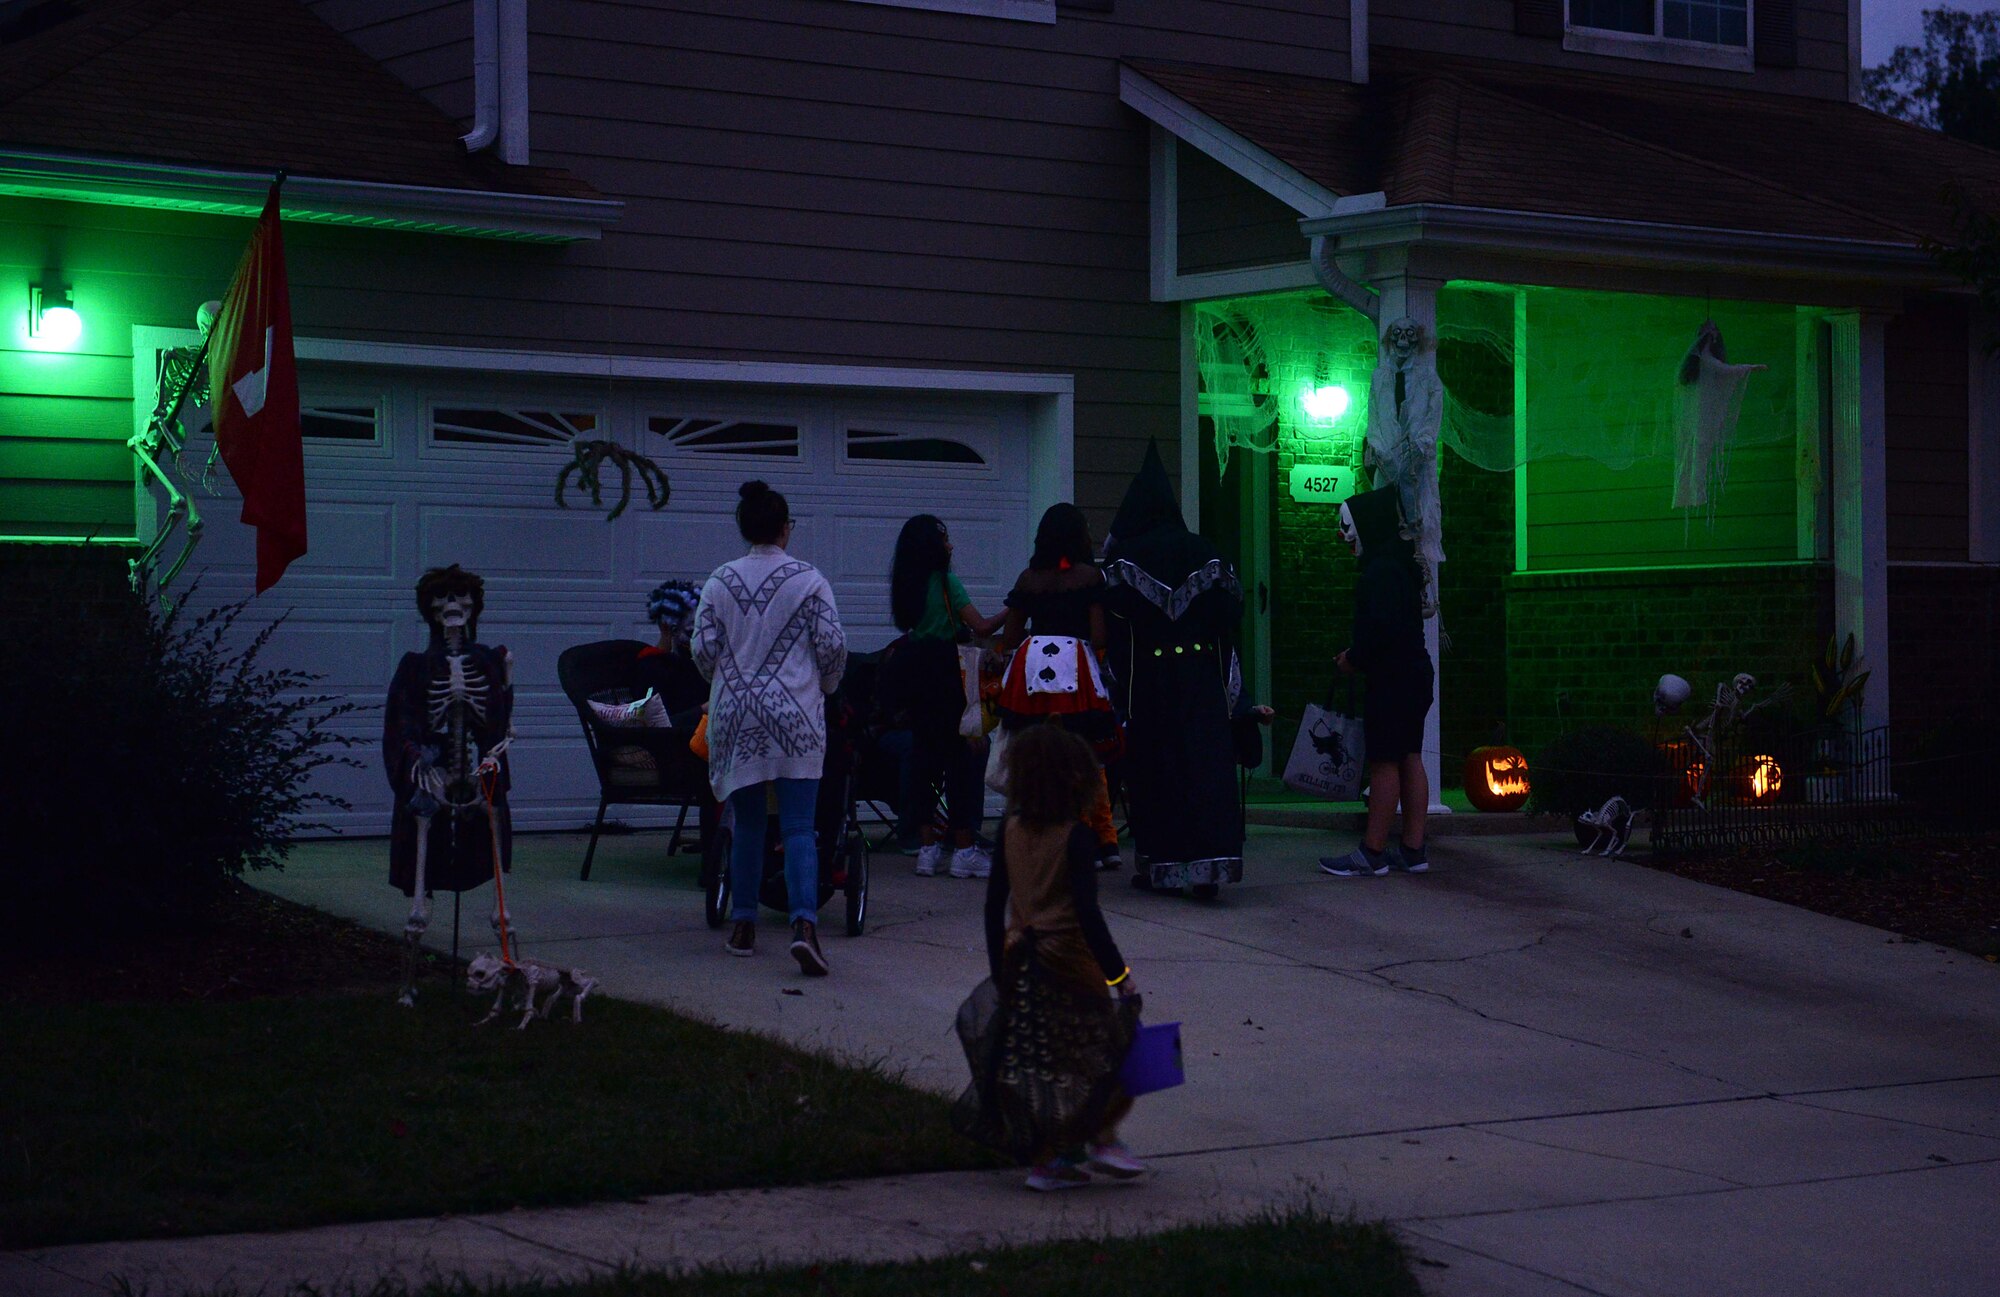 Attendees trick or treat at a decorated house Oct. 27, 2019, on Columbus Air Force Base, Miss. The first jack o’ lanterns were made out of turnips. (U.S. Air Force photo by Airman 1st Class Hannah Bean)